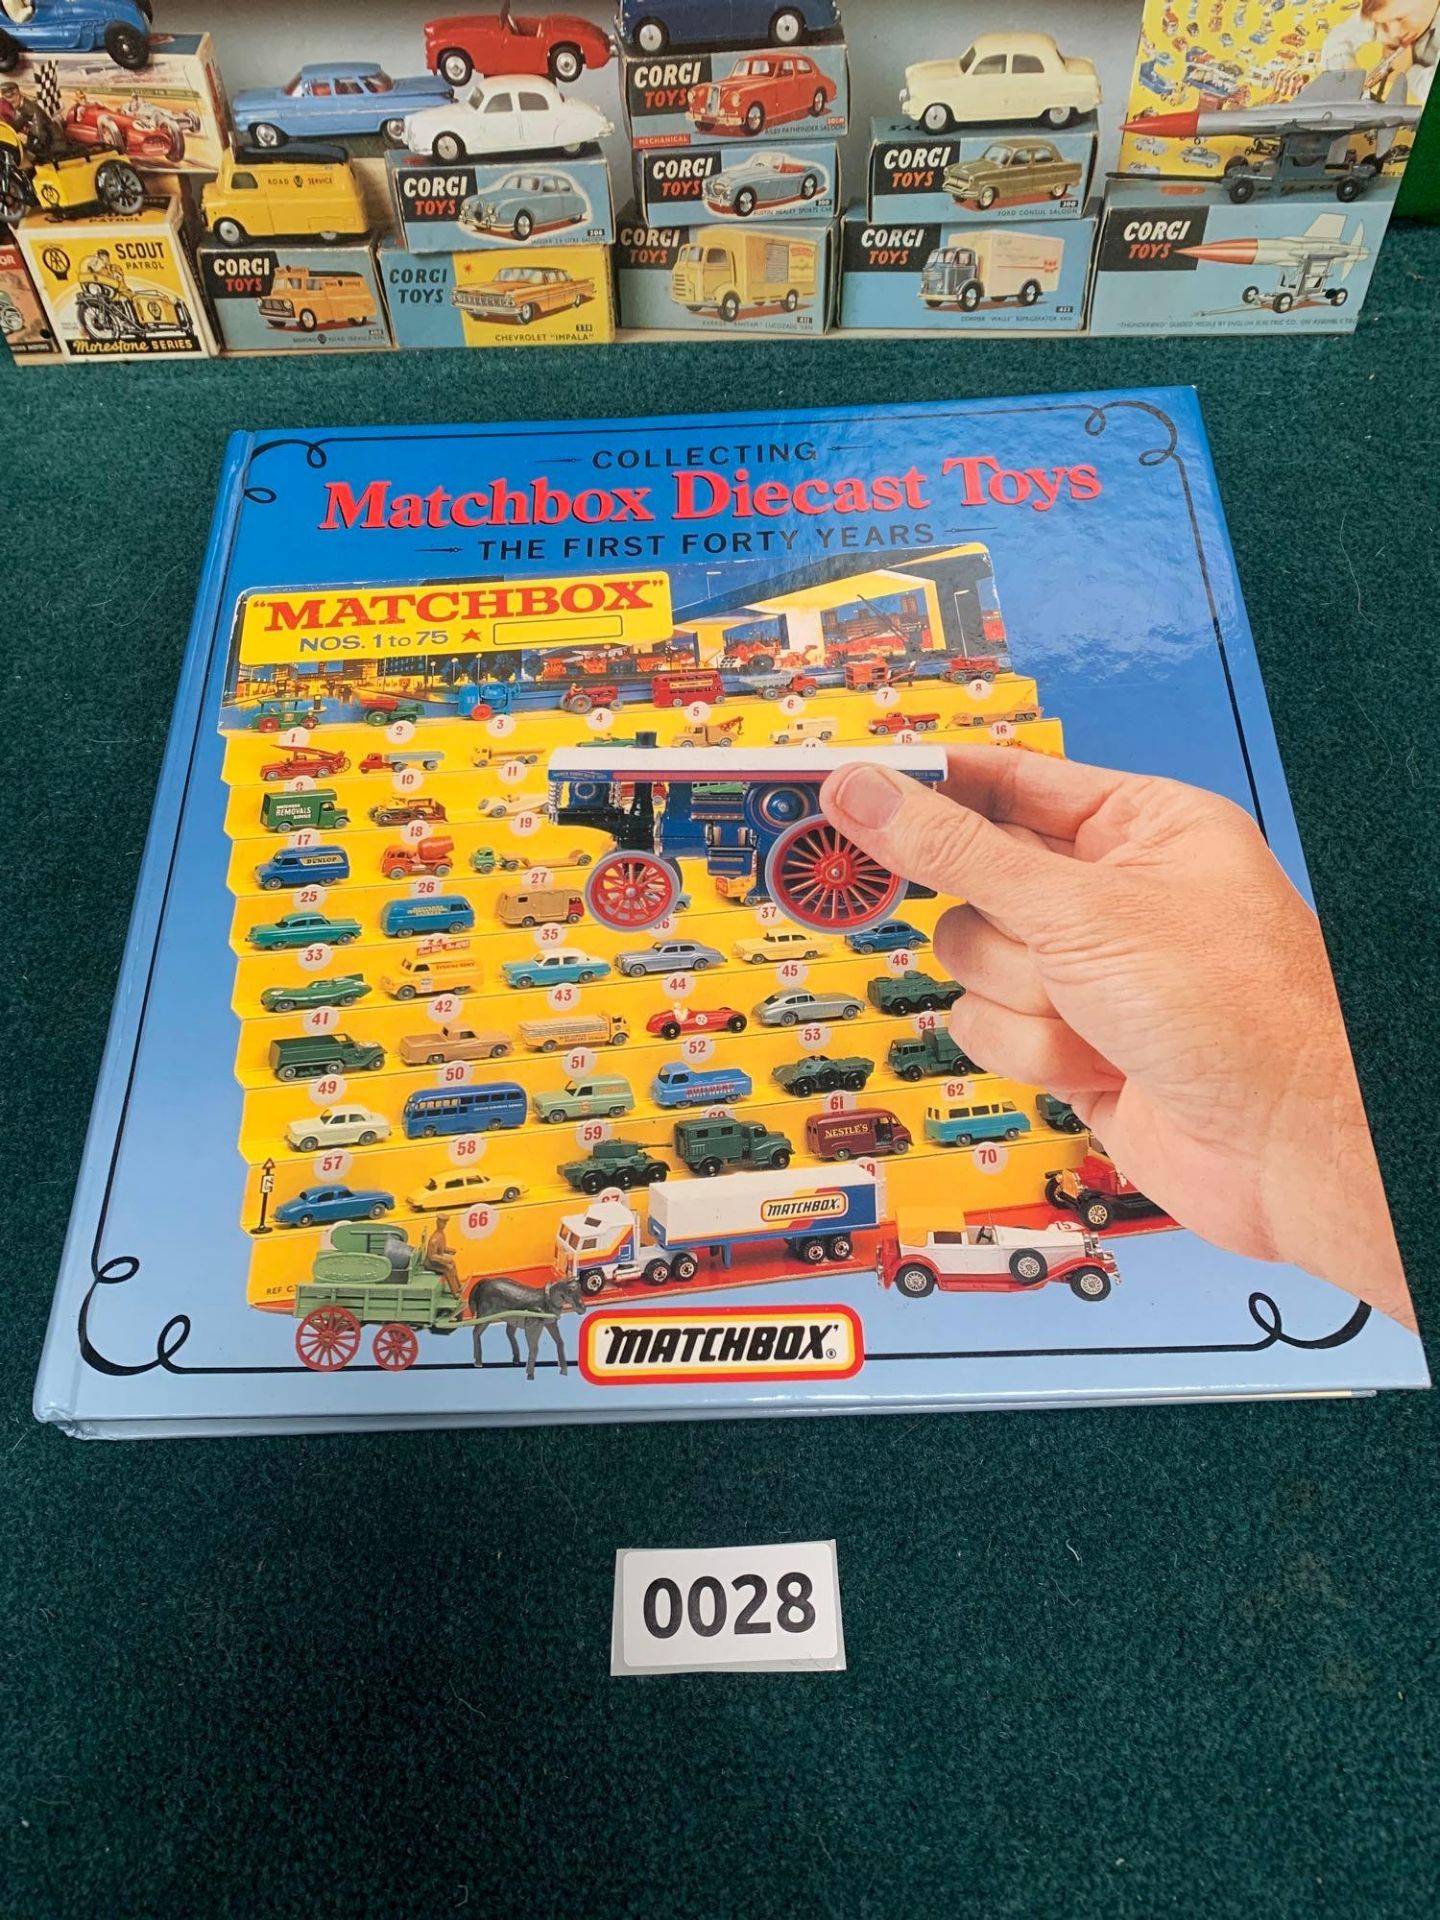 Collecting Matchbox Diecast Toys: First Forty Years  1 Jun. 1989 - Image 2 of 6